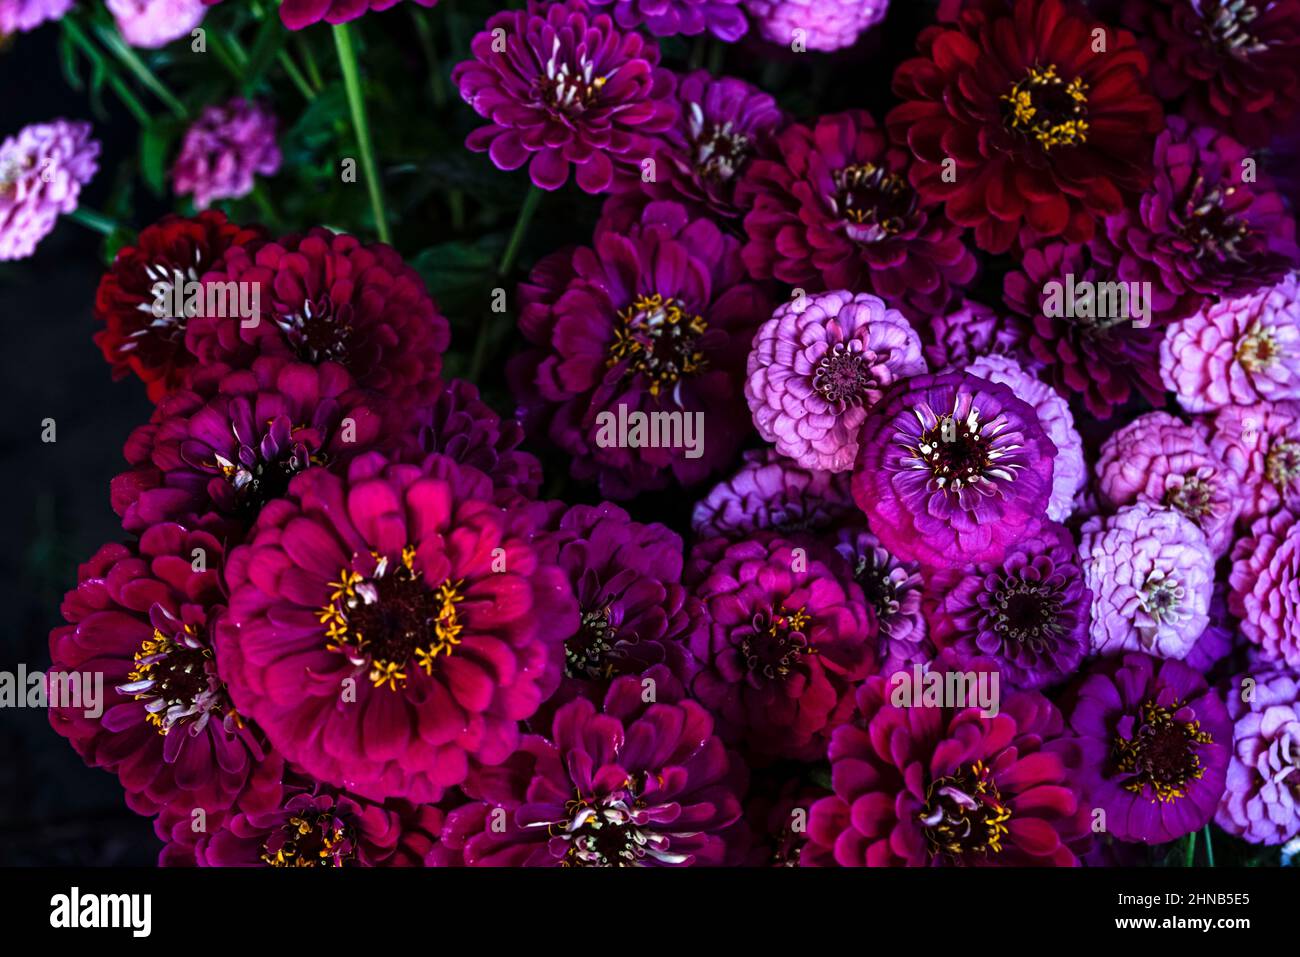 Profusion of brightly colored pink, fuchsia, purple and red zinnias, summer flowers exuding joy and good energy. Stock Photo